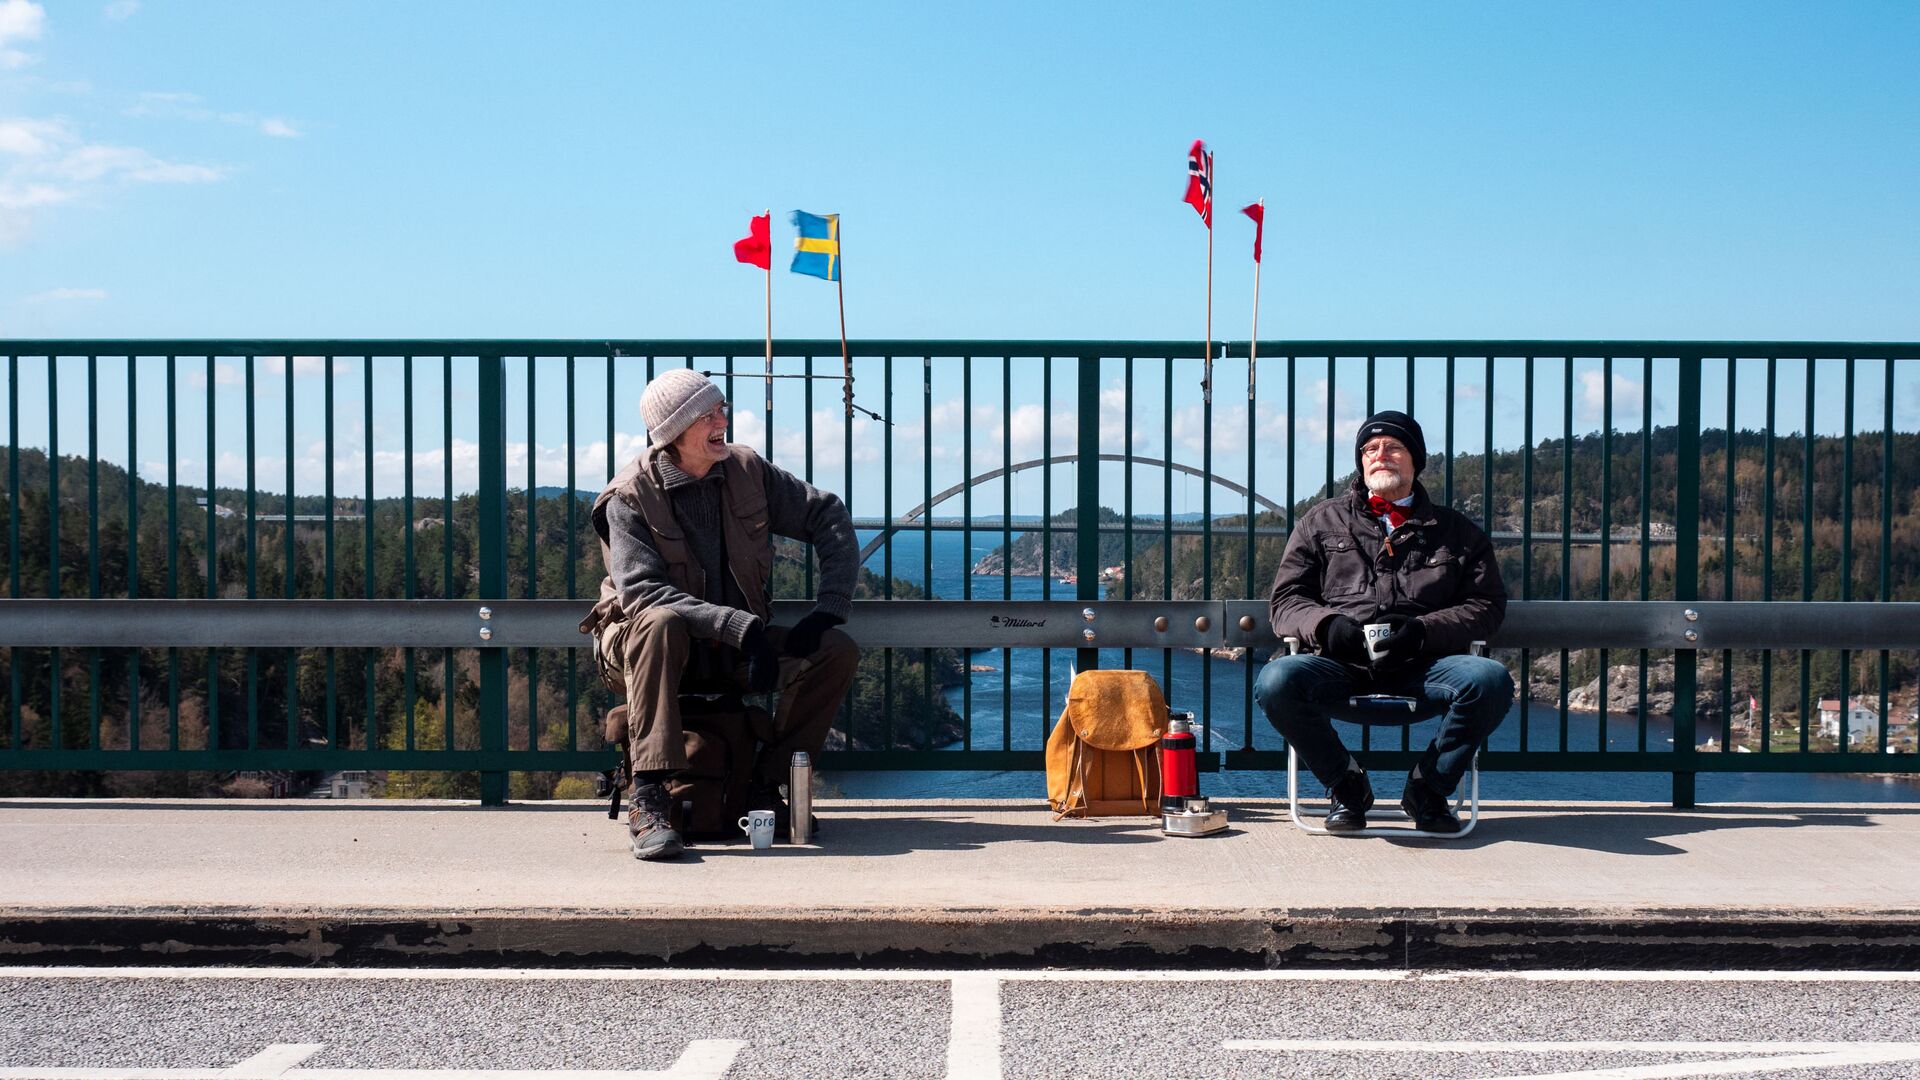 Pontus Berglund (L) sits on the Swedish side while his brother Ola sits on the Norwegian side of the old bridge of Svinesund with the respective country flags and the new Svinesund Bridge in the background, in Svinesund, Norway  and Sweden, on May 1, 2021 - Sputnik International, 1920, 02.02.2022